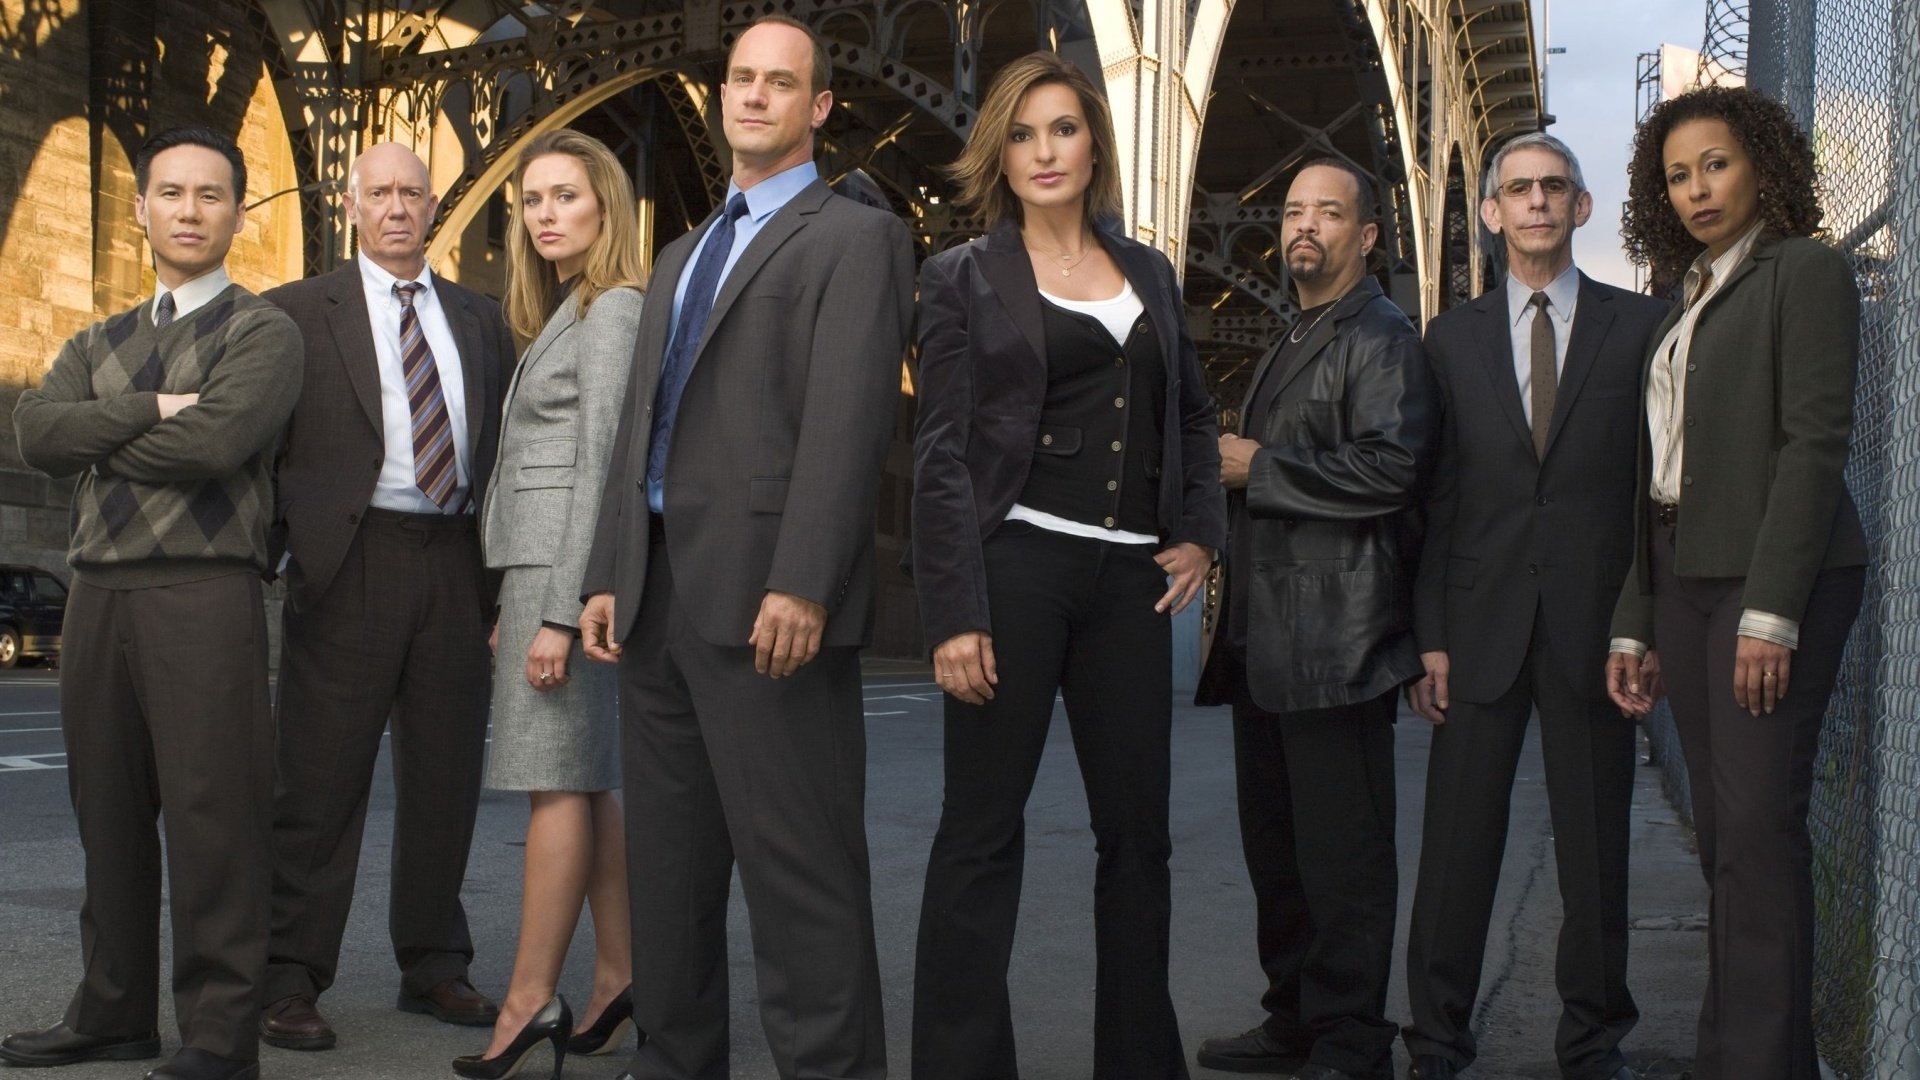 10+ Law & Order: Special Victims Unit HD Wallpapers and Backgrounds.